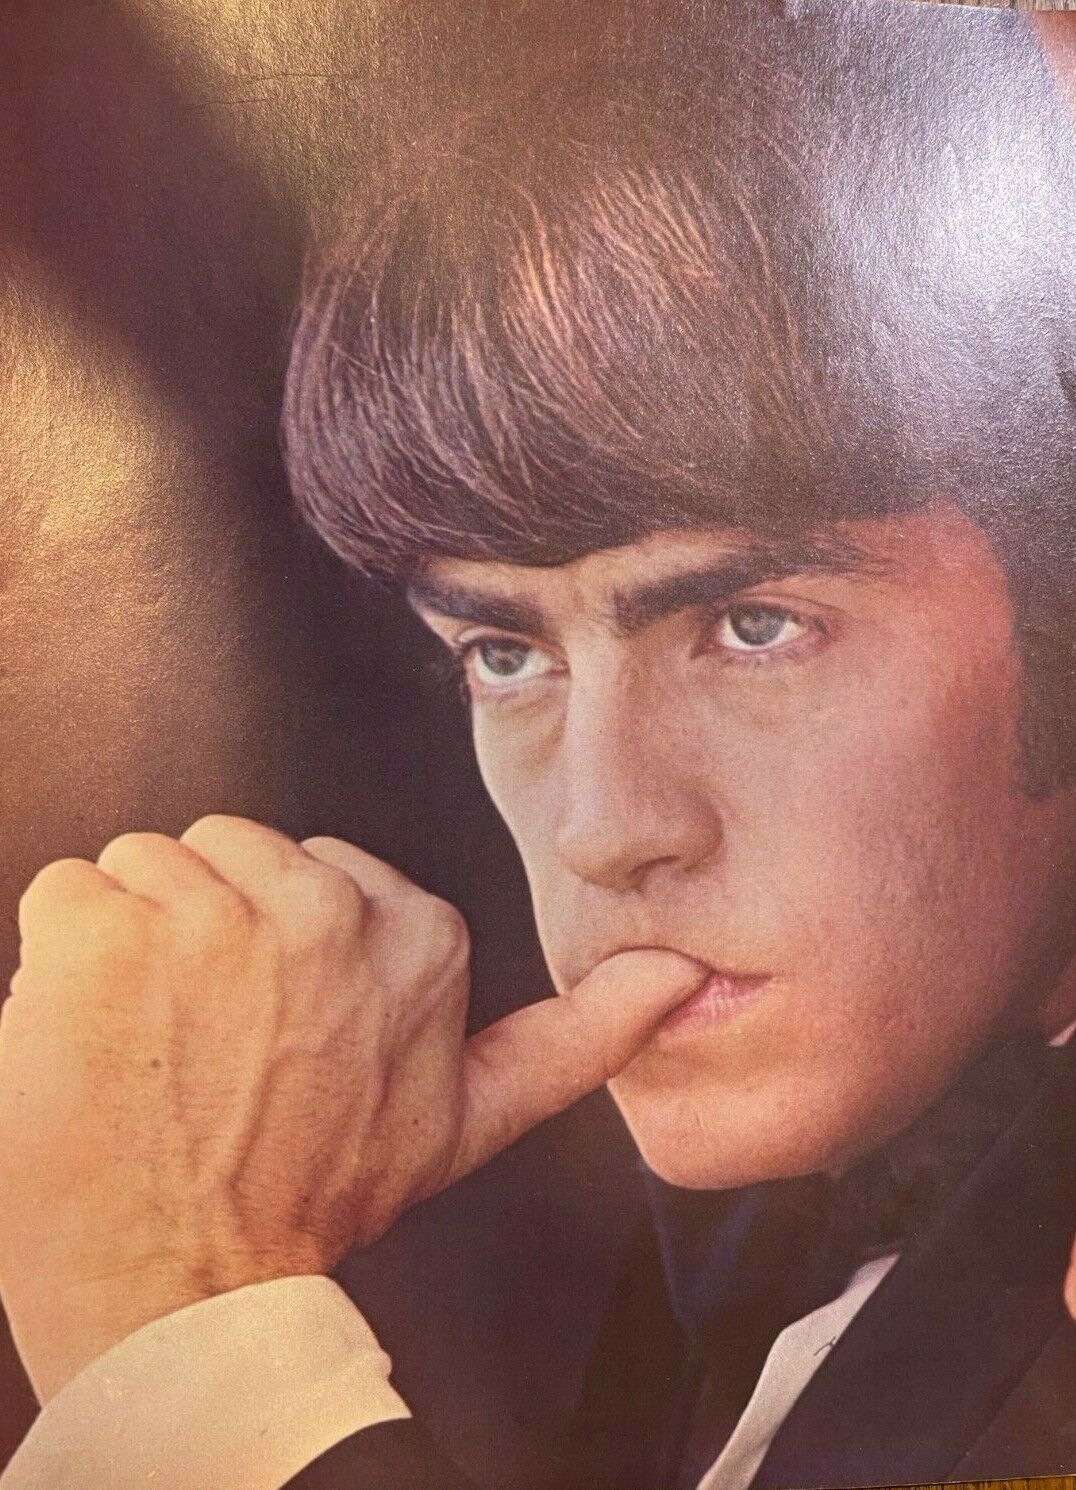 1967 Mark Lindsay Talks About His Fans